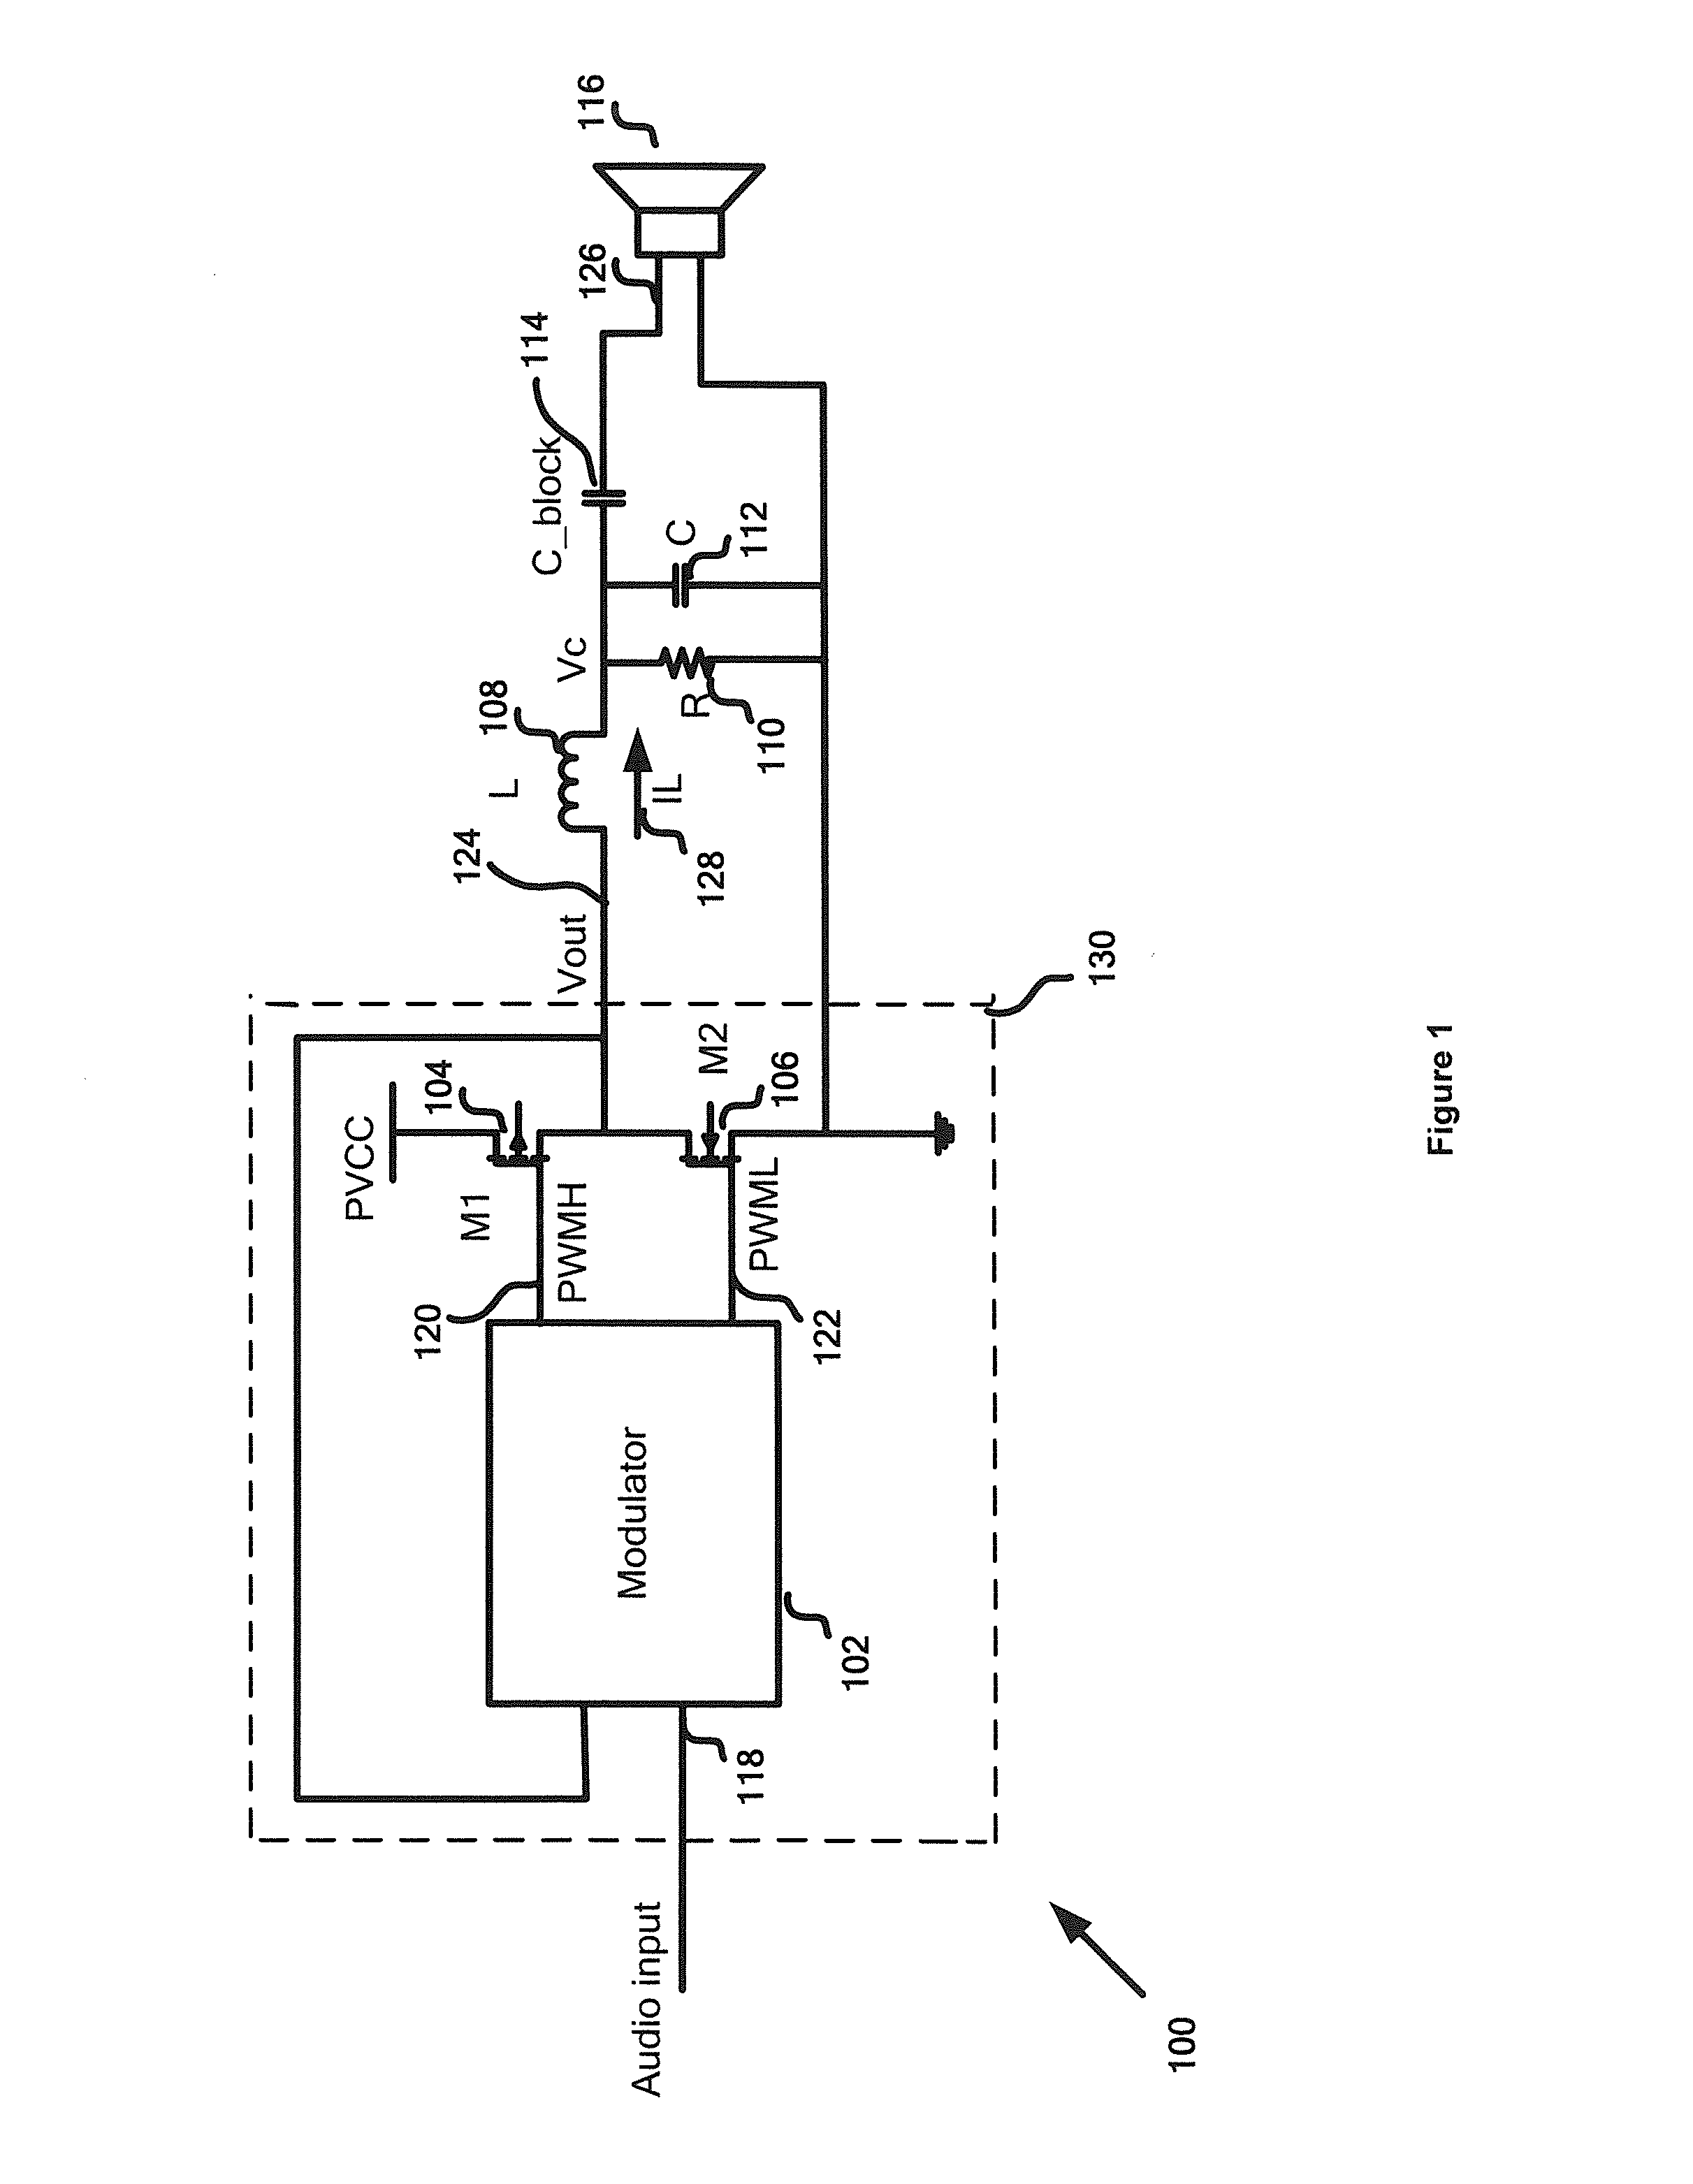 Amplification systems and methods with noise reductions